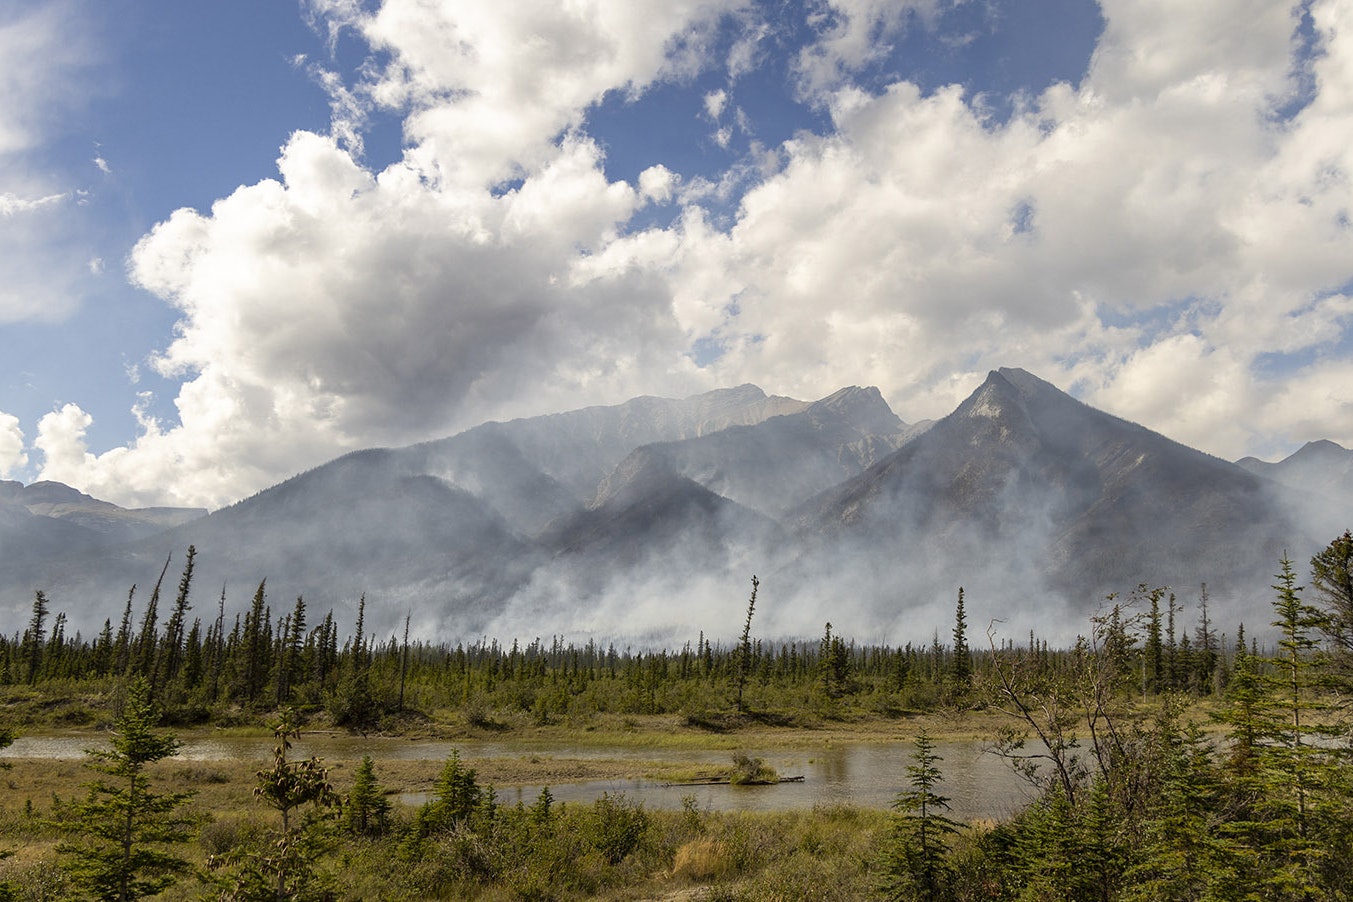 Wildfires in western Canada have been throwing huge amounts of smoke that are creating hazy conditions all across the Rocky Mountain region, including Wyoming.